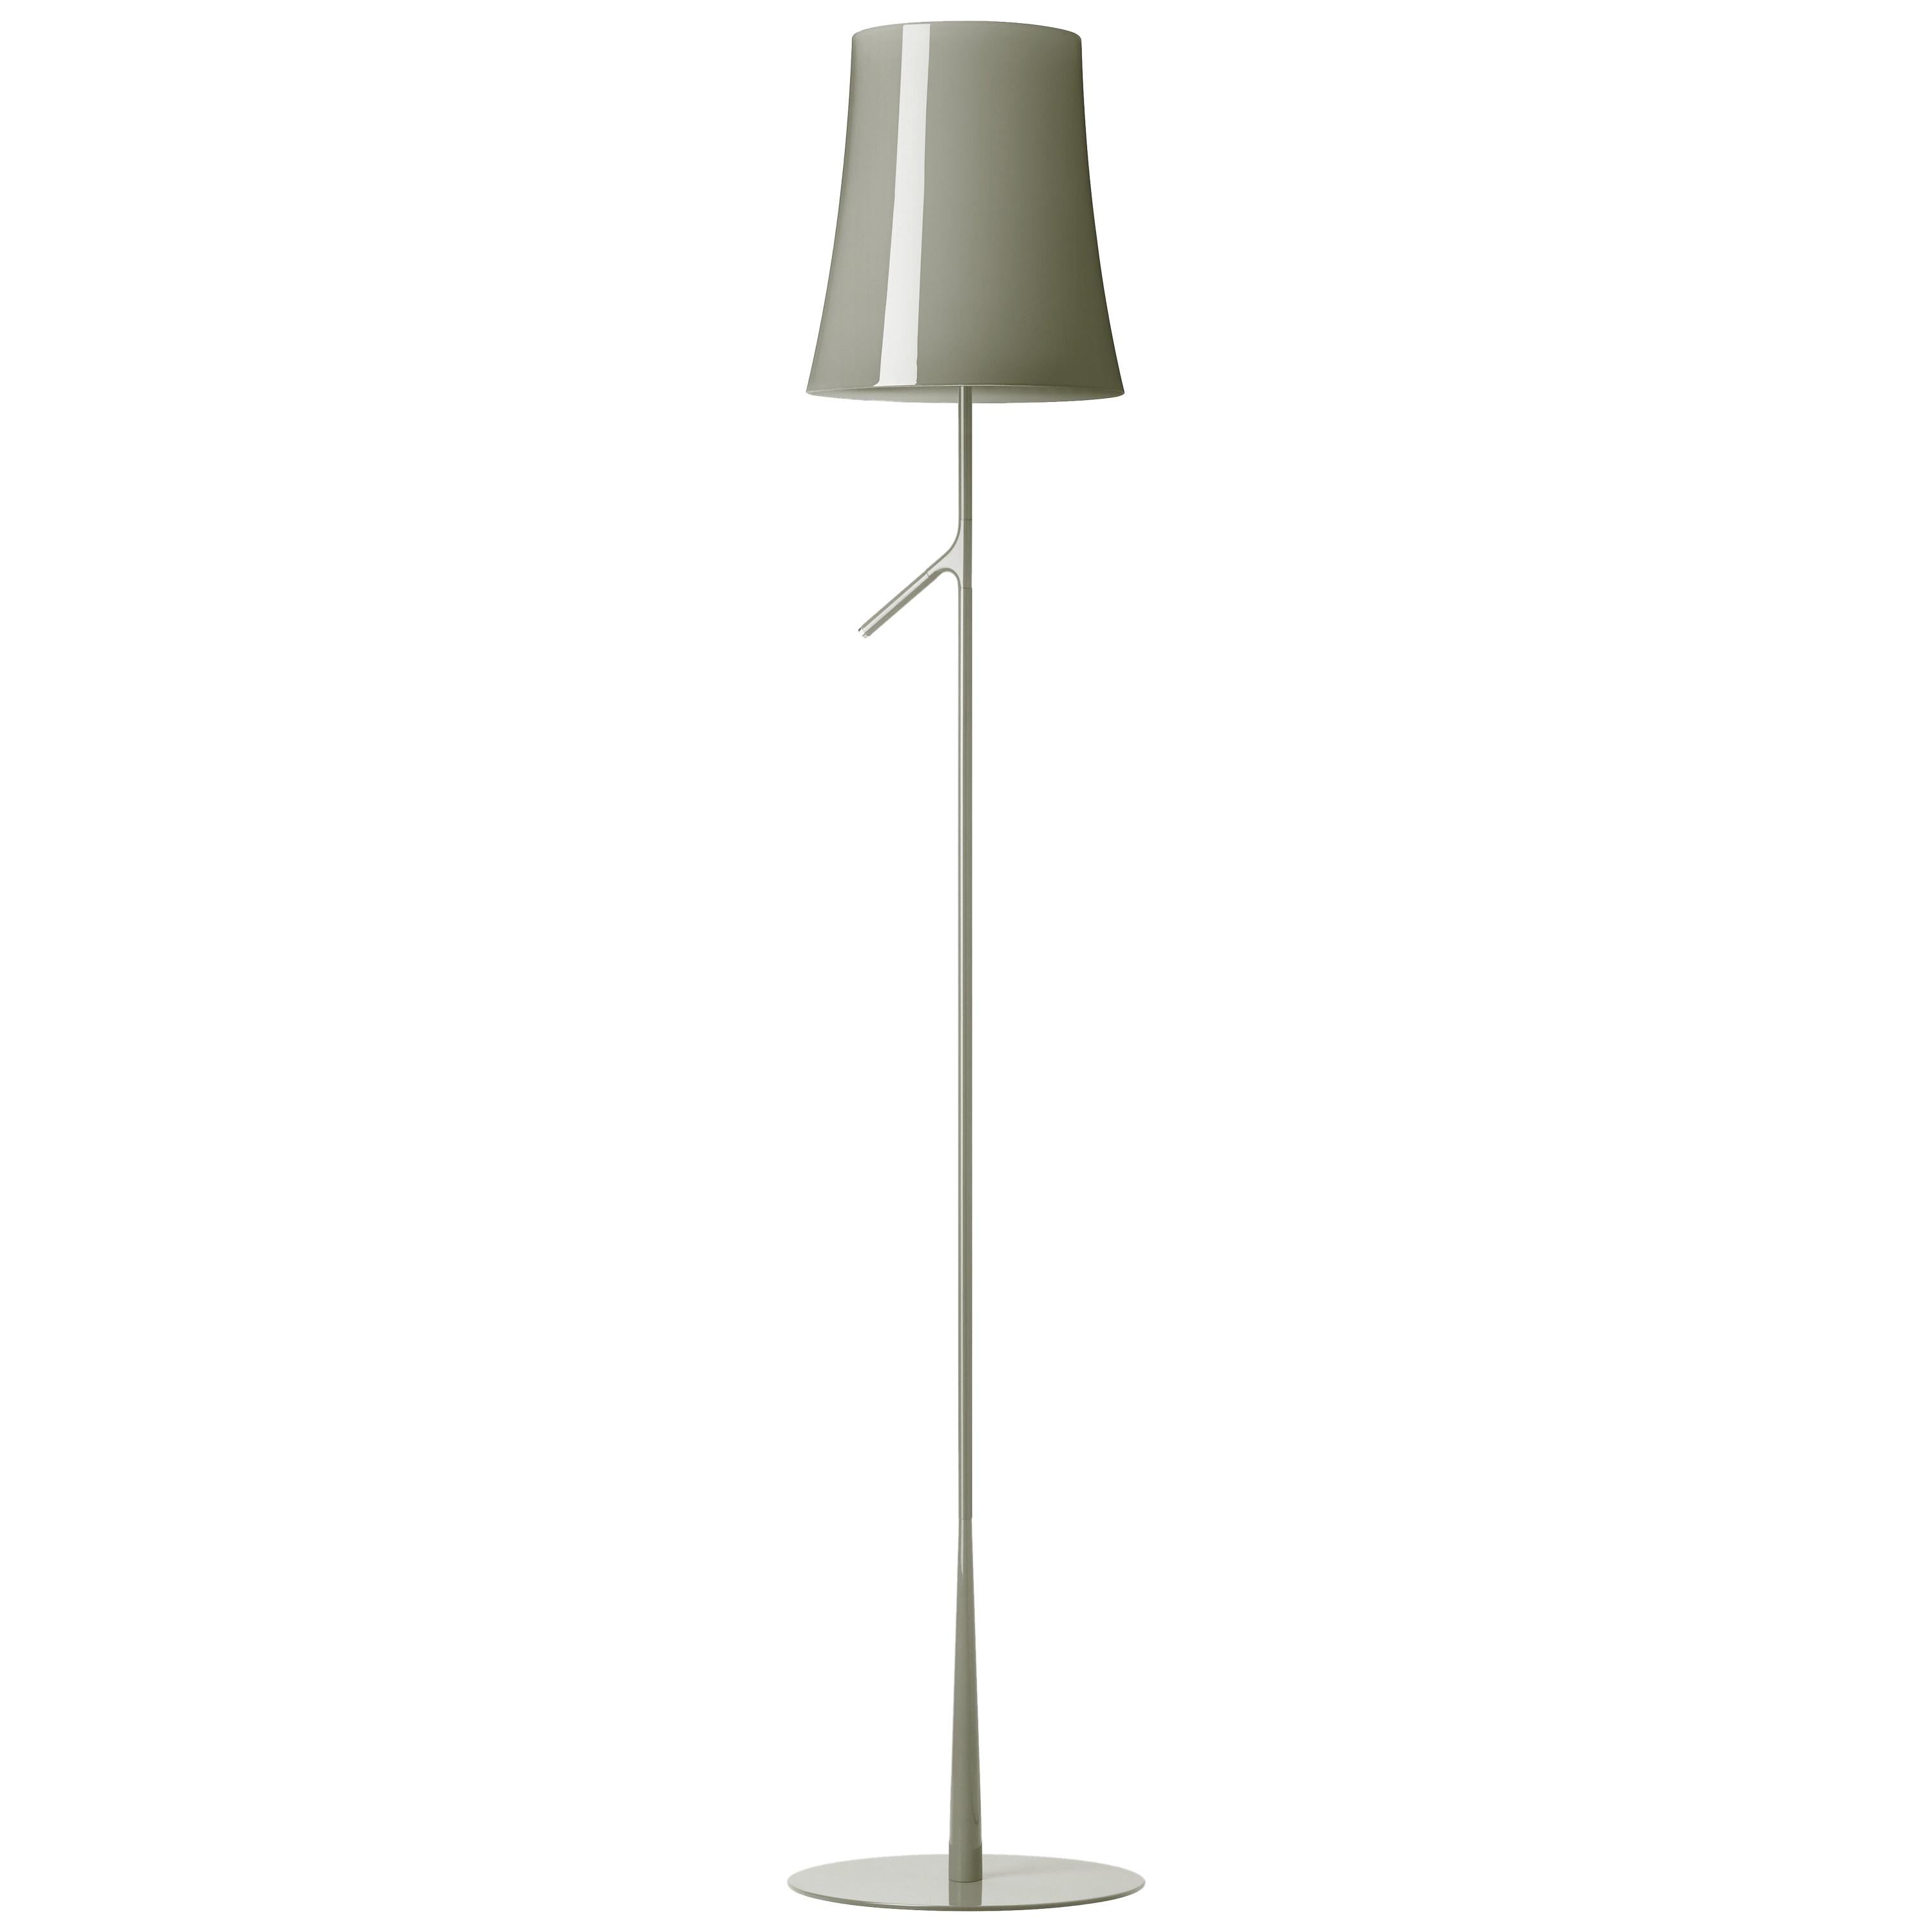 Foscarini Dimmable Birdie Floor Lamp in Grey by Ludovica & Roberto Palomba For Sale